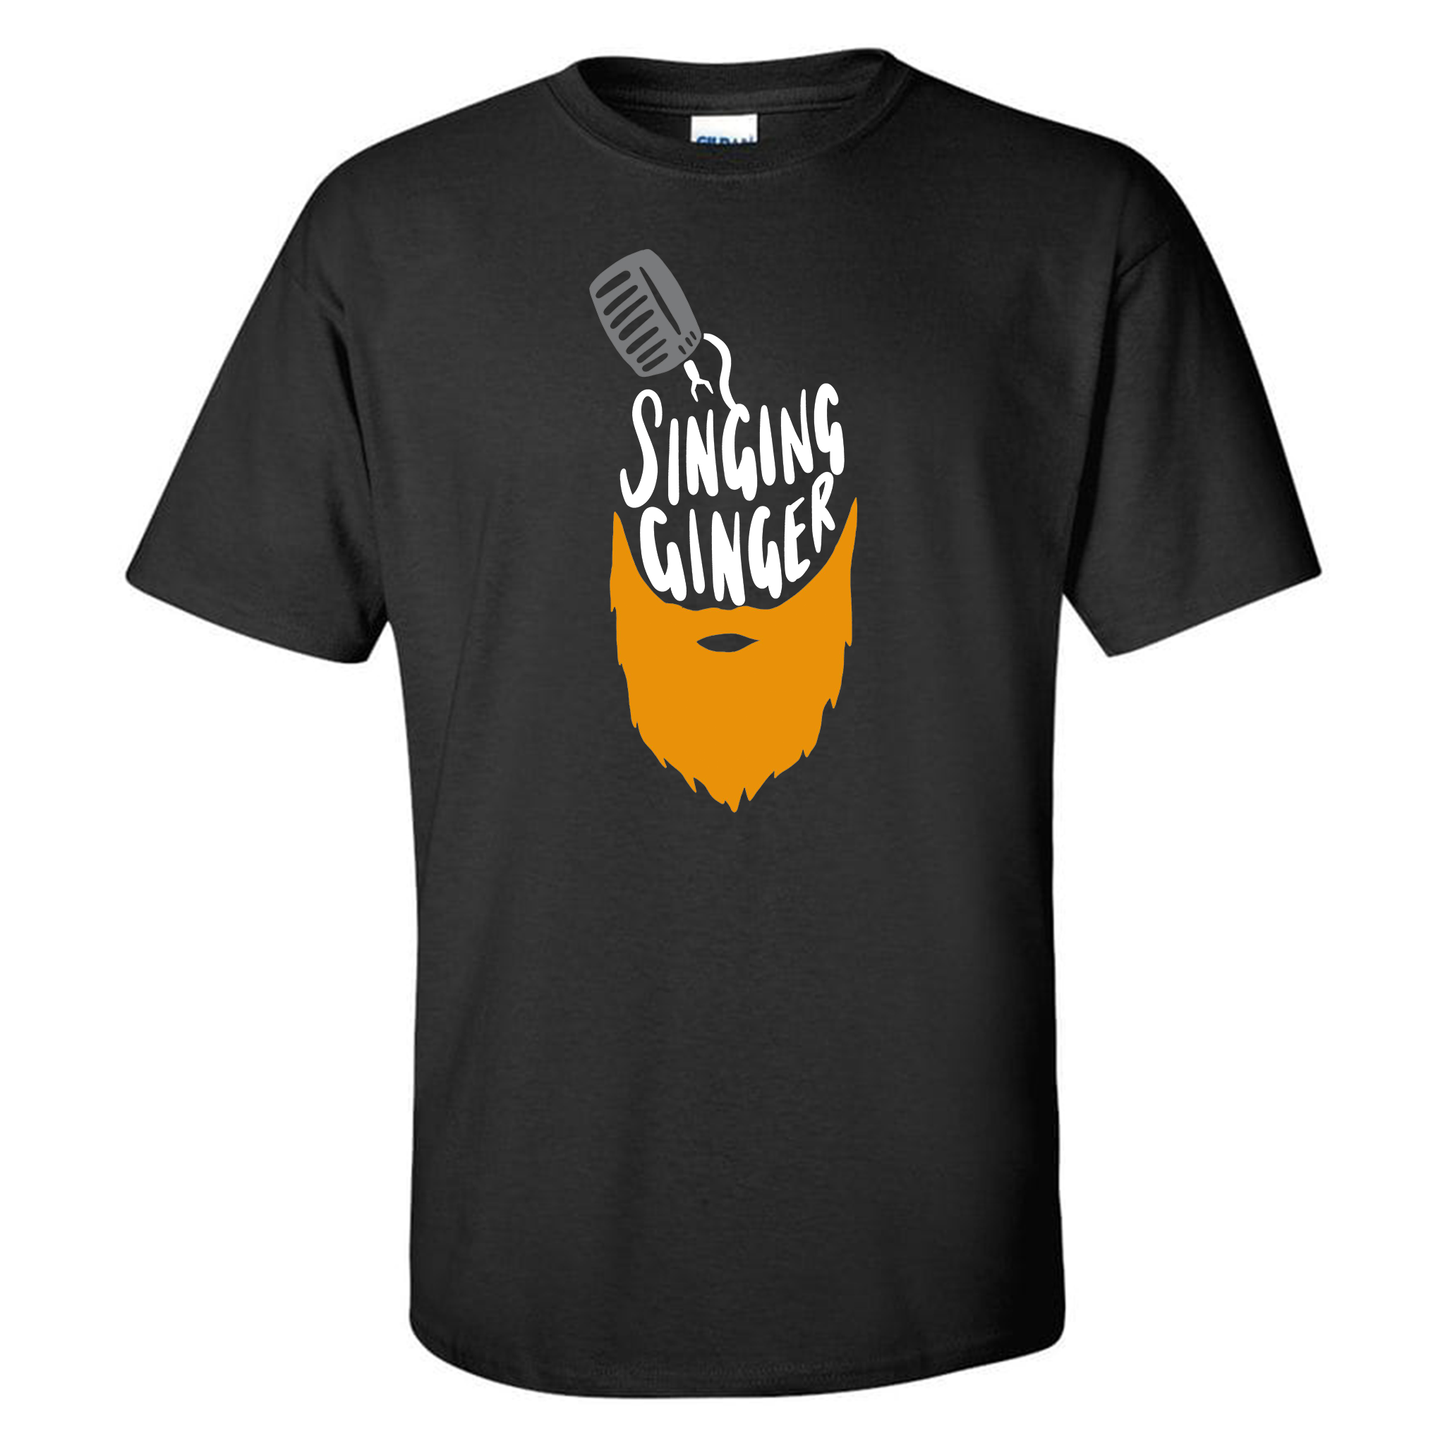 Singing Ginger Official Tee